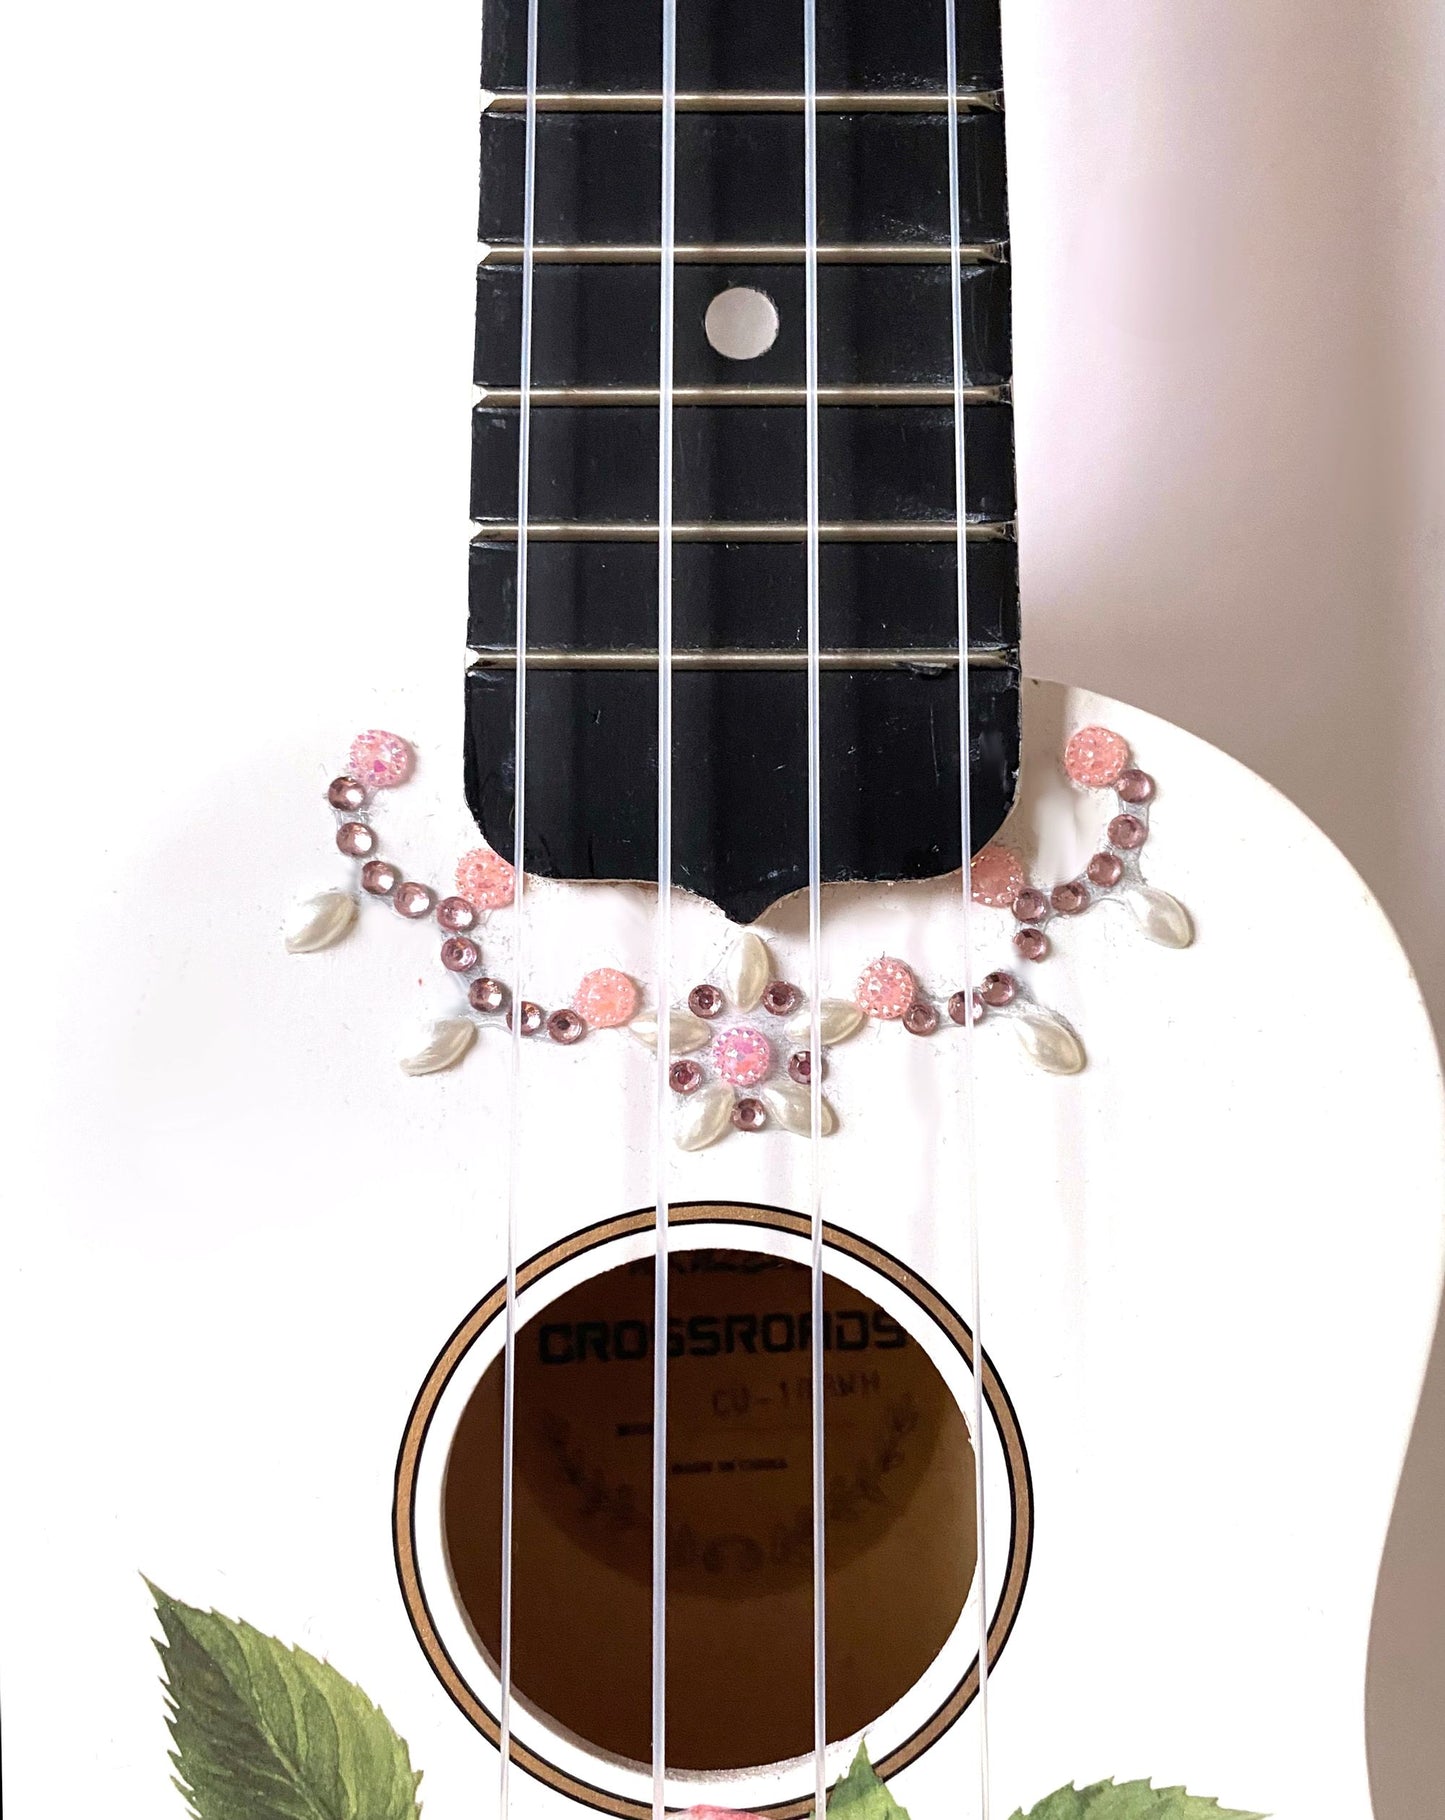 Rose Delight Ukulele with Crystals - Rozanna's Violins